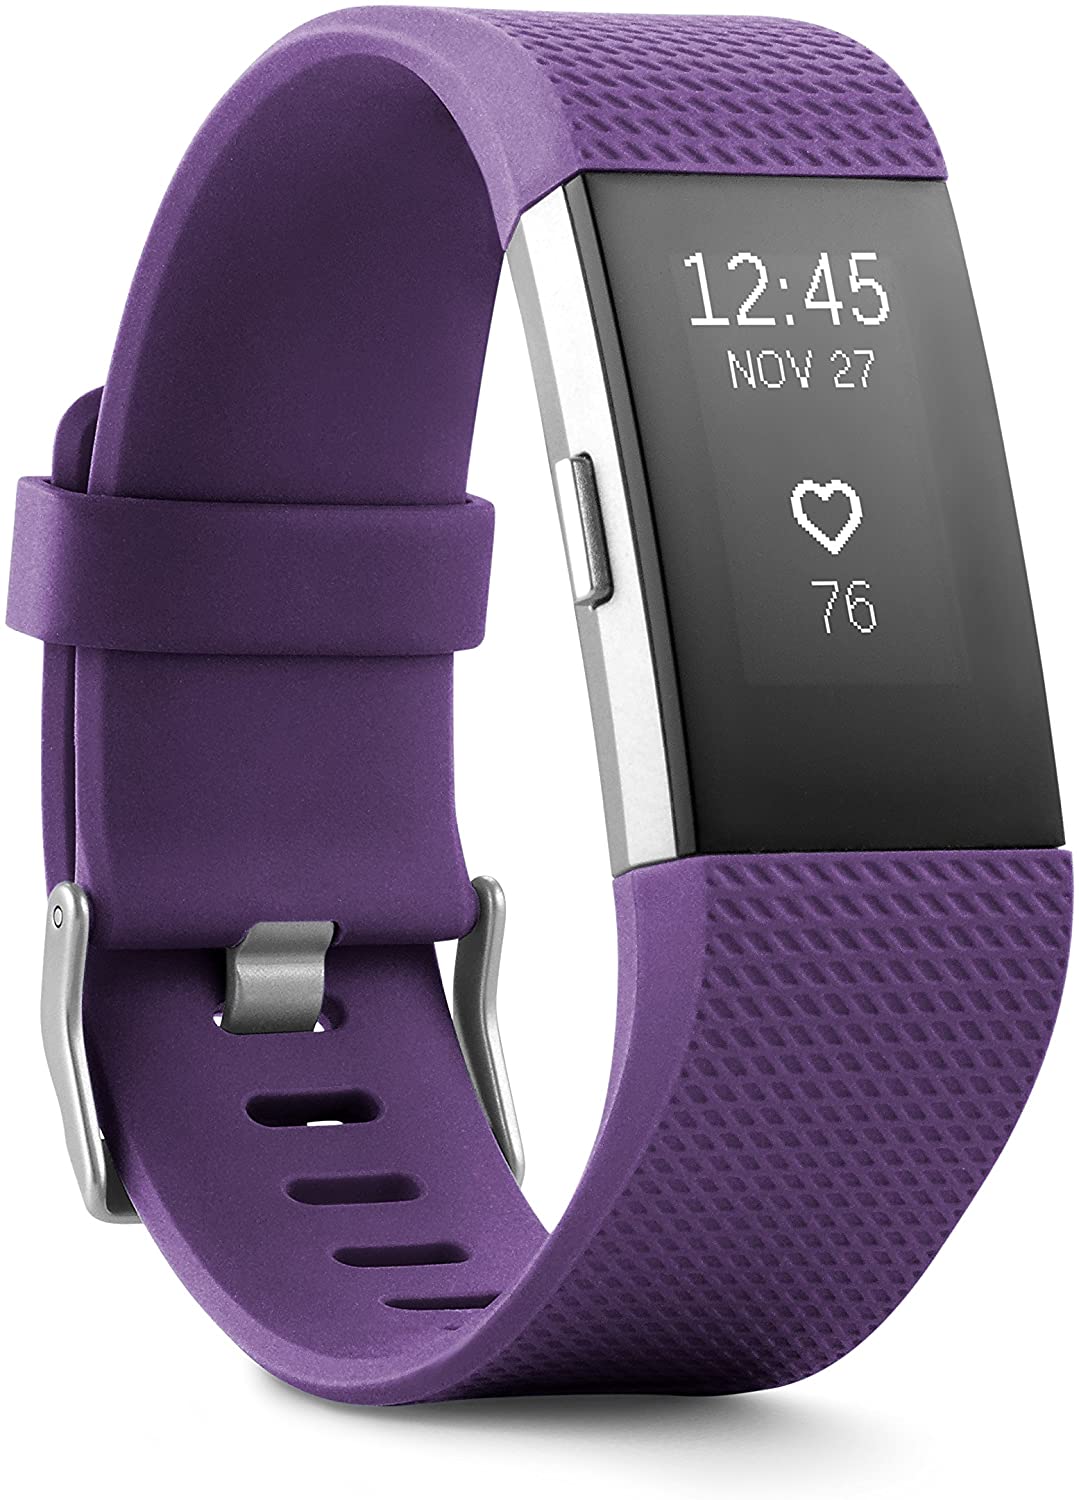 Fitbit Charge 2 Heart Rate + Fitness Wristband, Plum, Small (US Version)